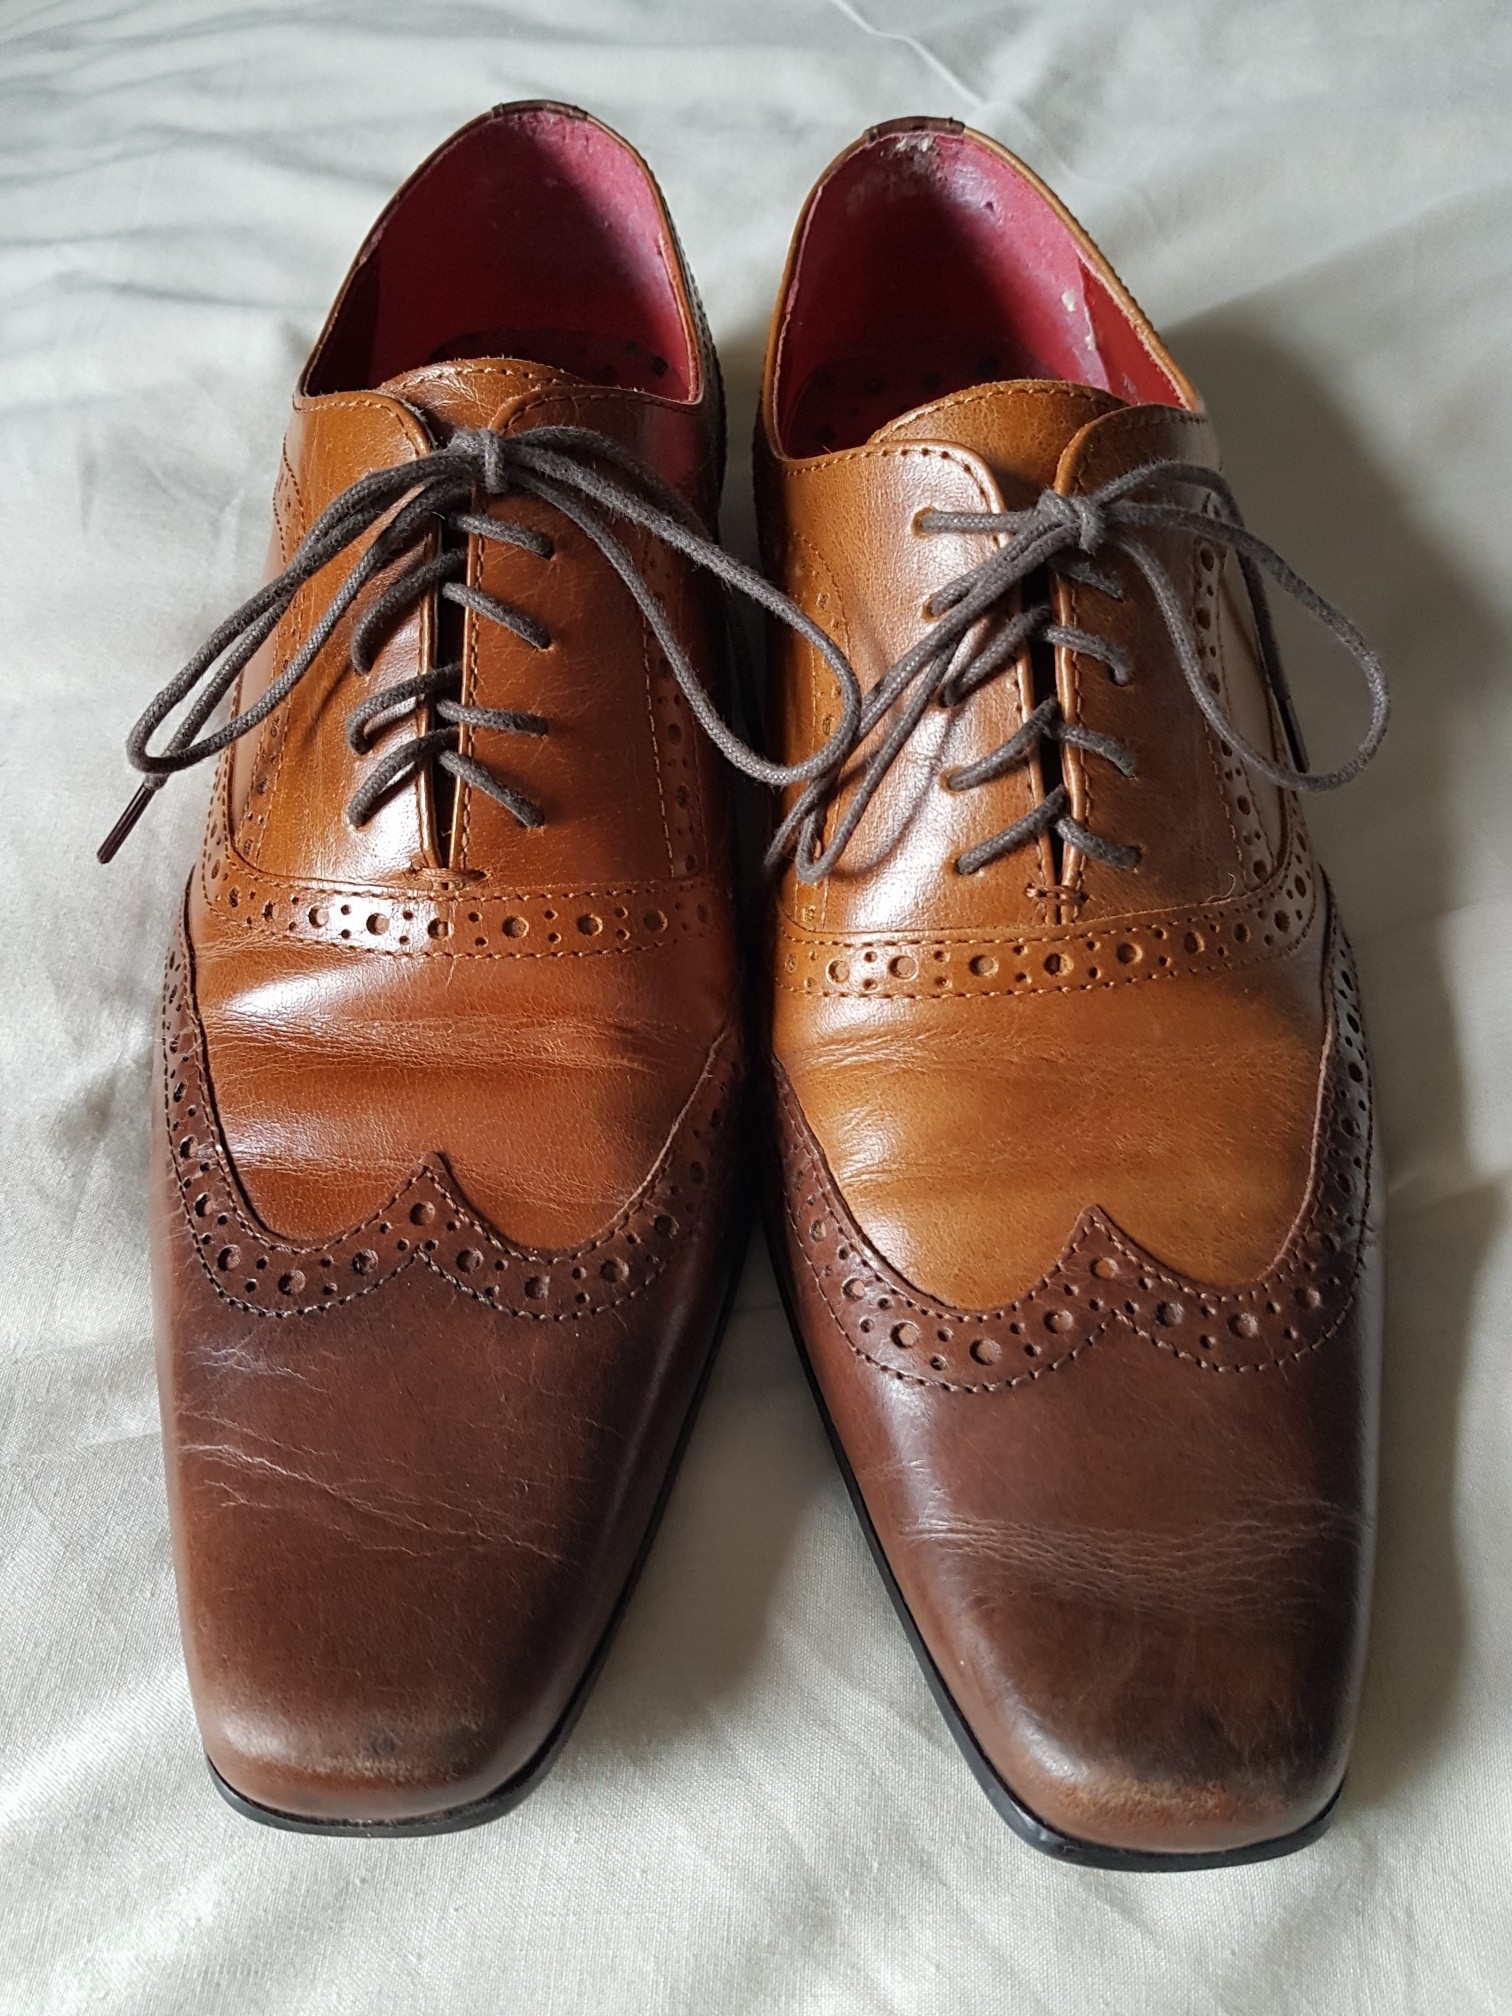 hell for leather brogues next 38e682